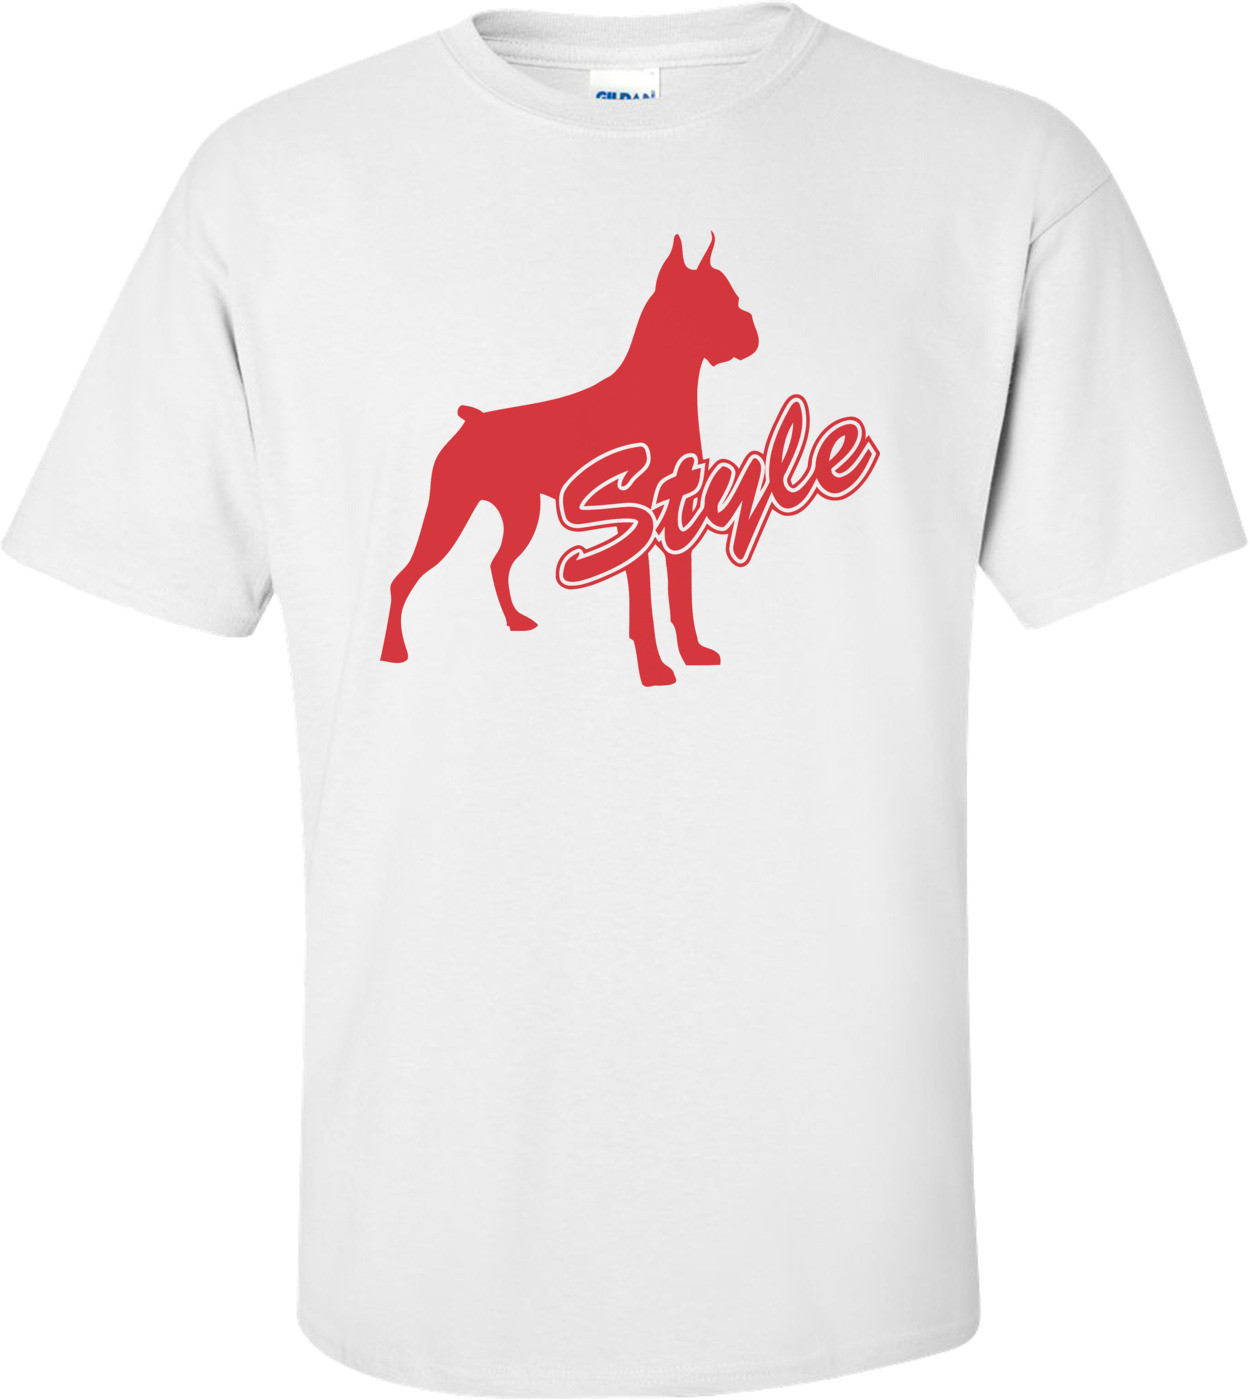 Doggy Style T-shirt